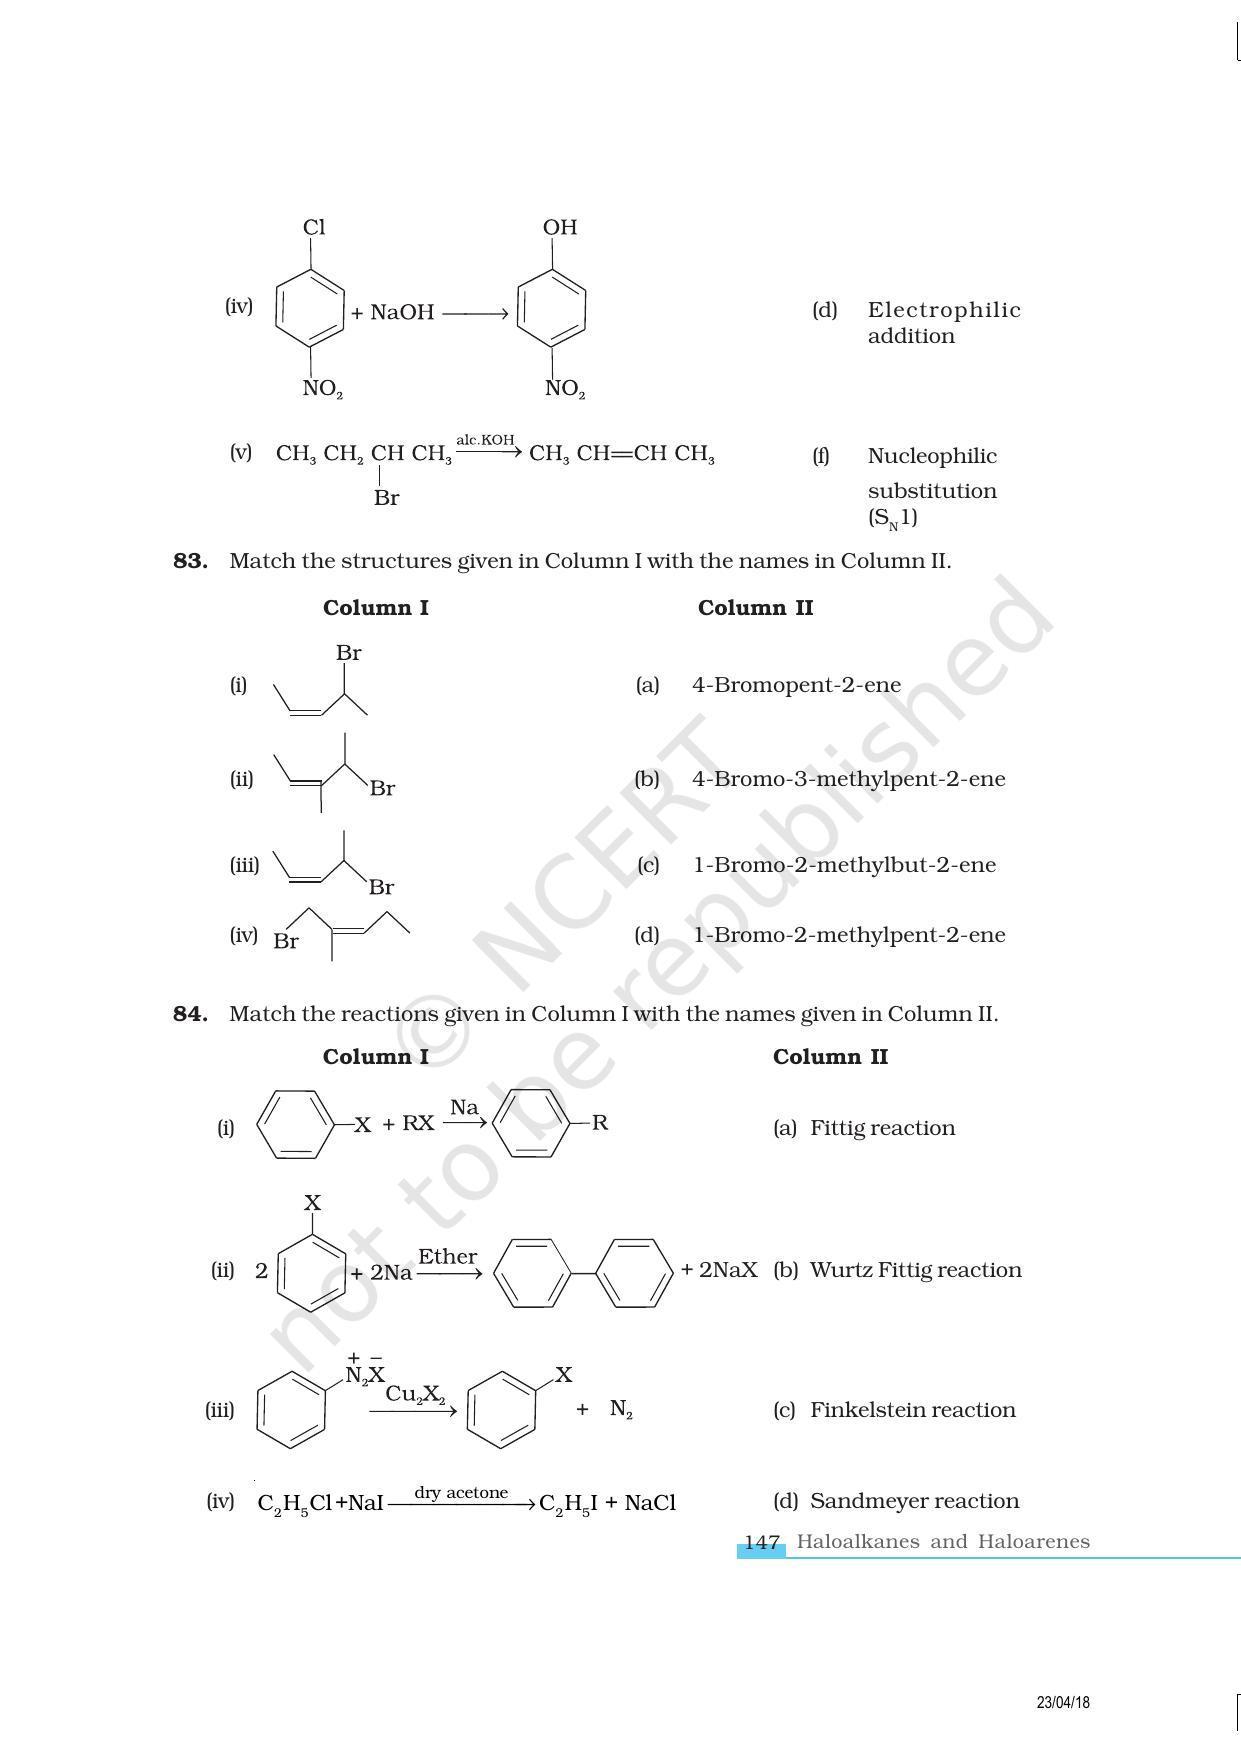 NCERT Exemplar Book for Class 12 Chemistry: Chapter 10 Haloalkanes and Haloarenes - Page 15